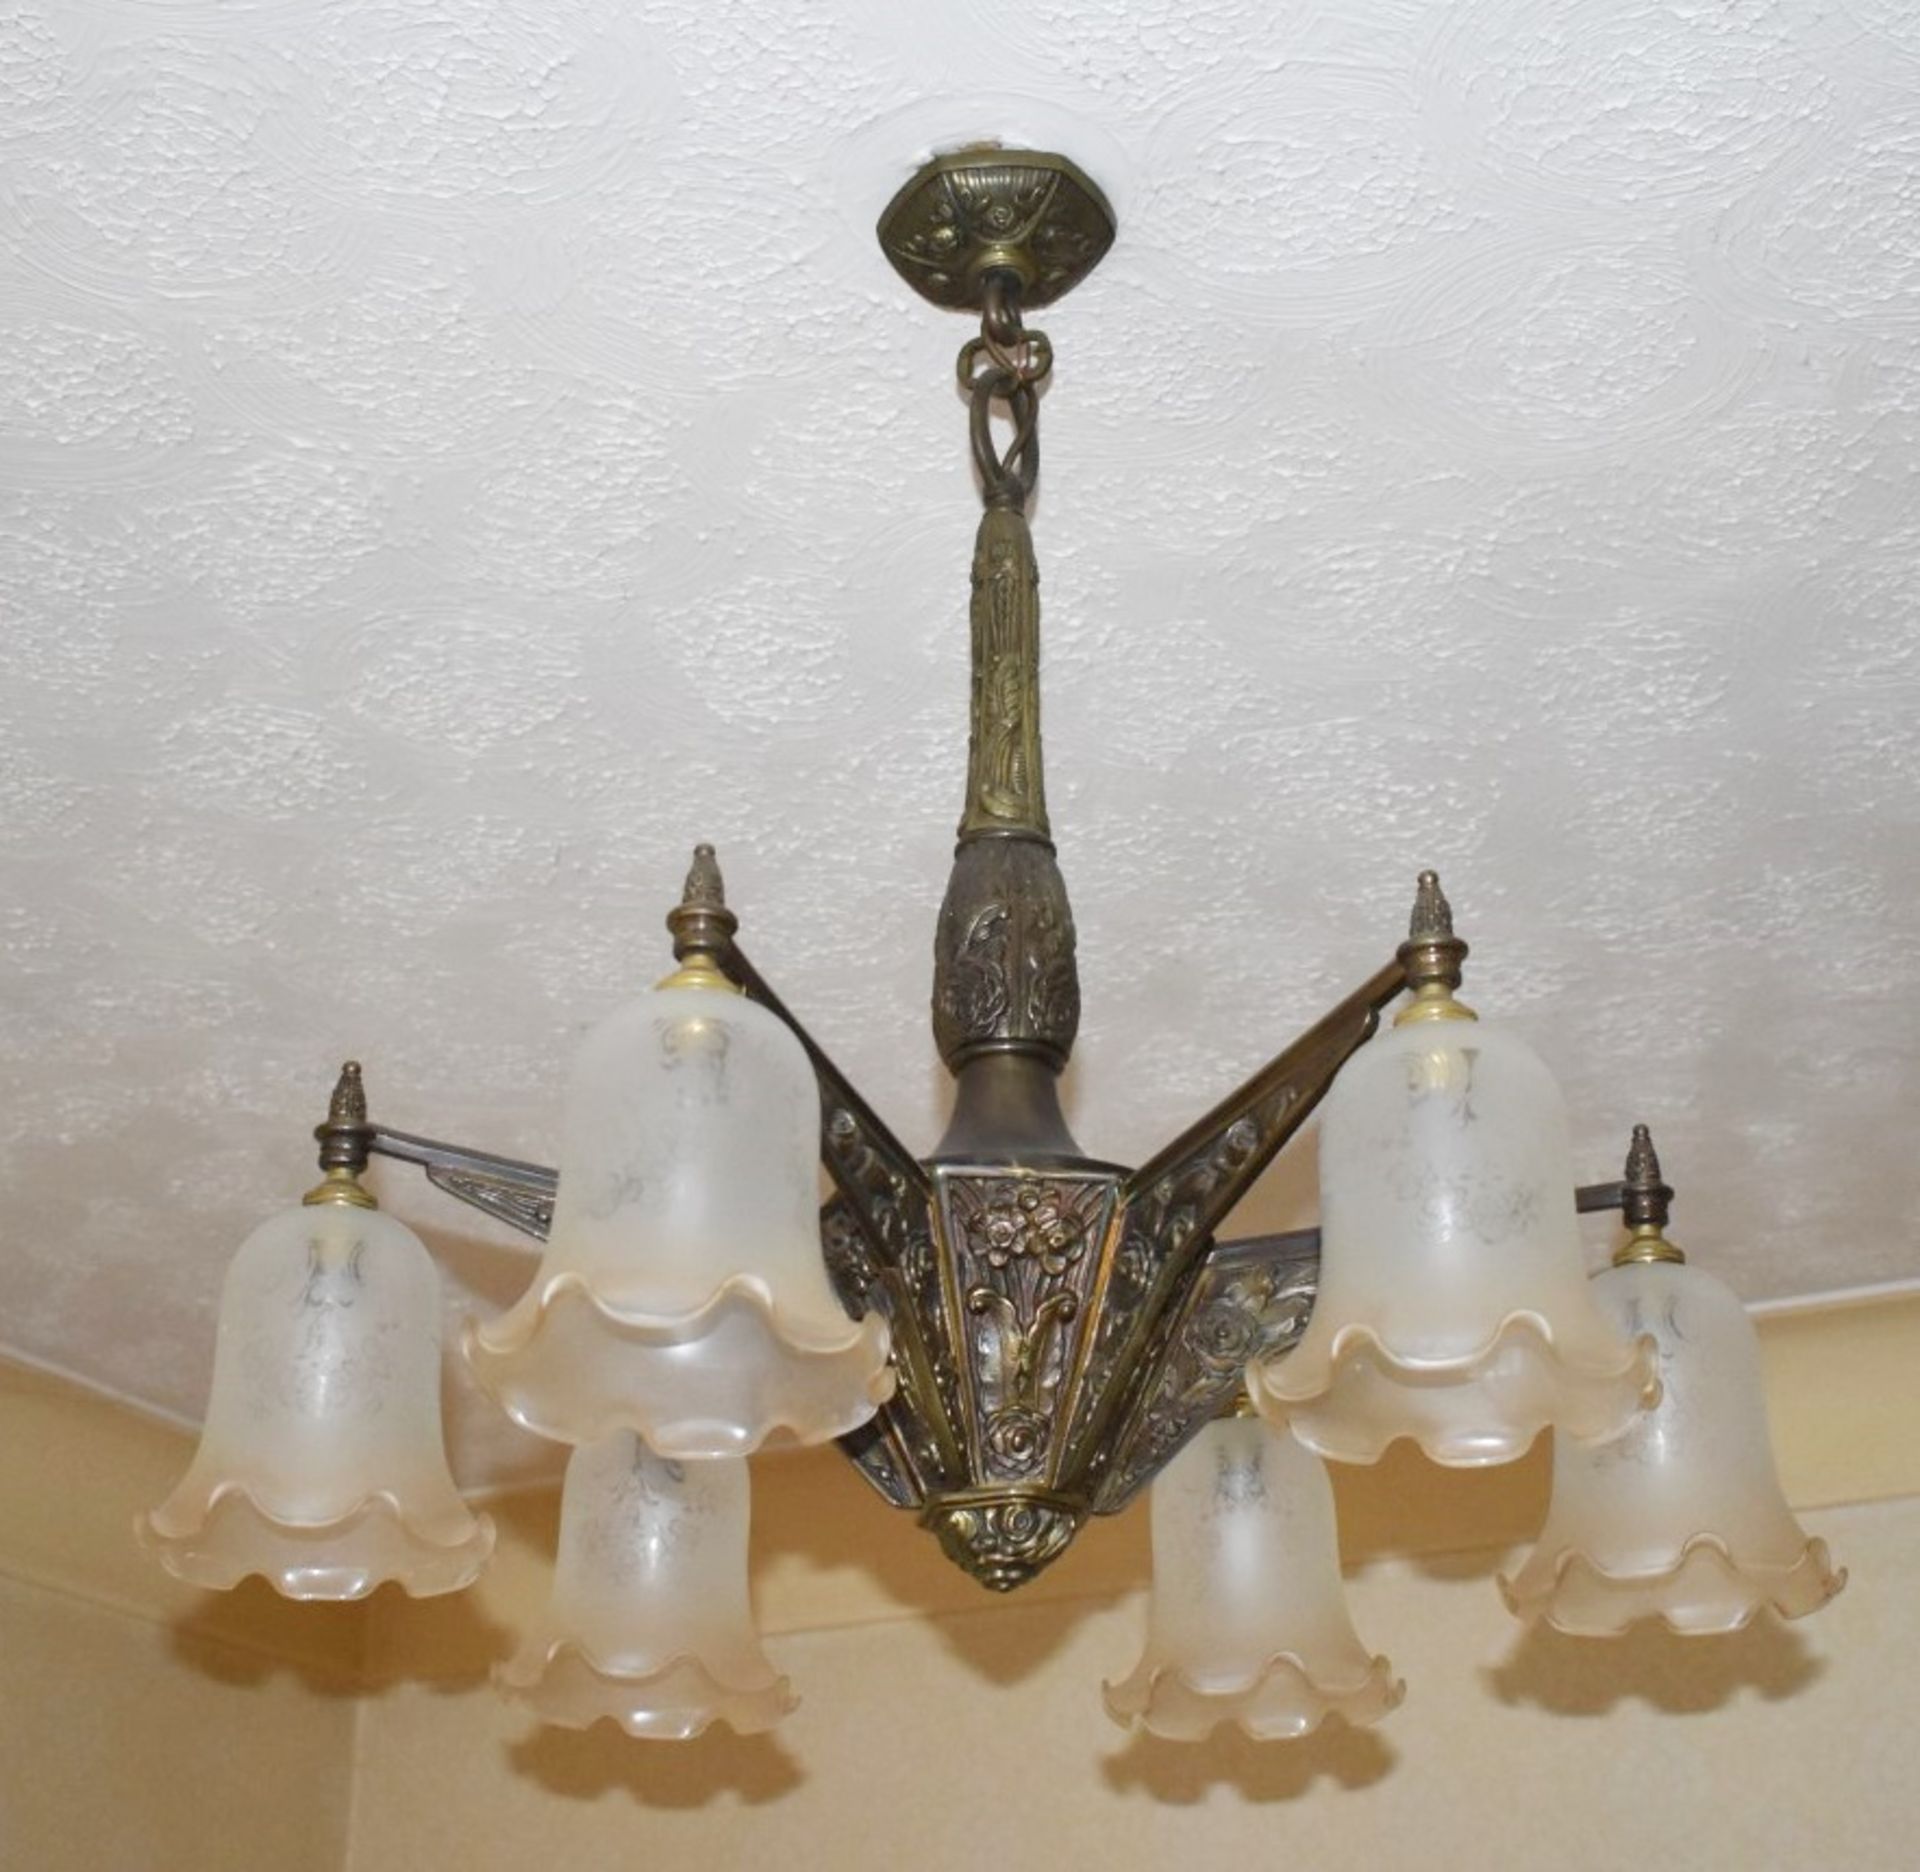 1 x Vintage 6 Light Bronze Chandelier With Frosted Glass Tulip Bell Shades - Dimensions: Drop 72 x - Image 8 of 14